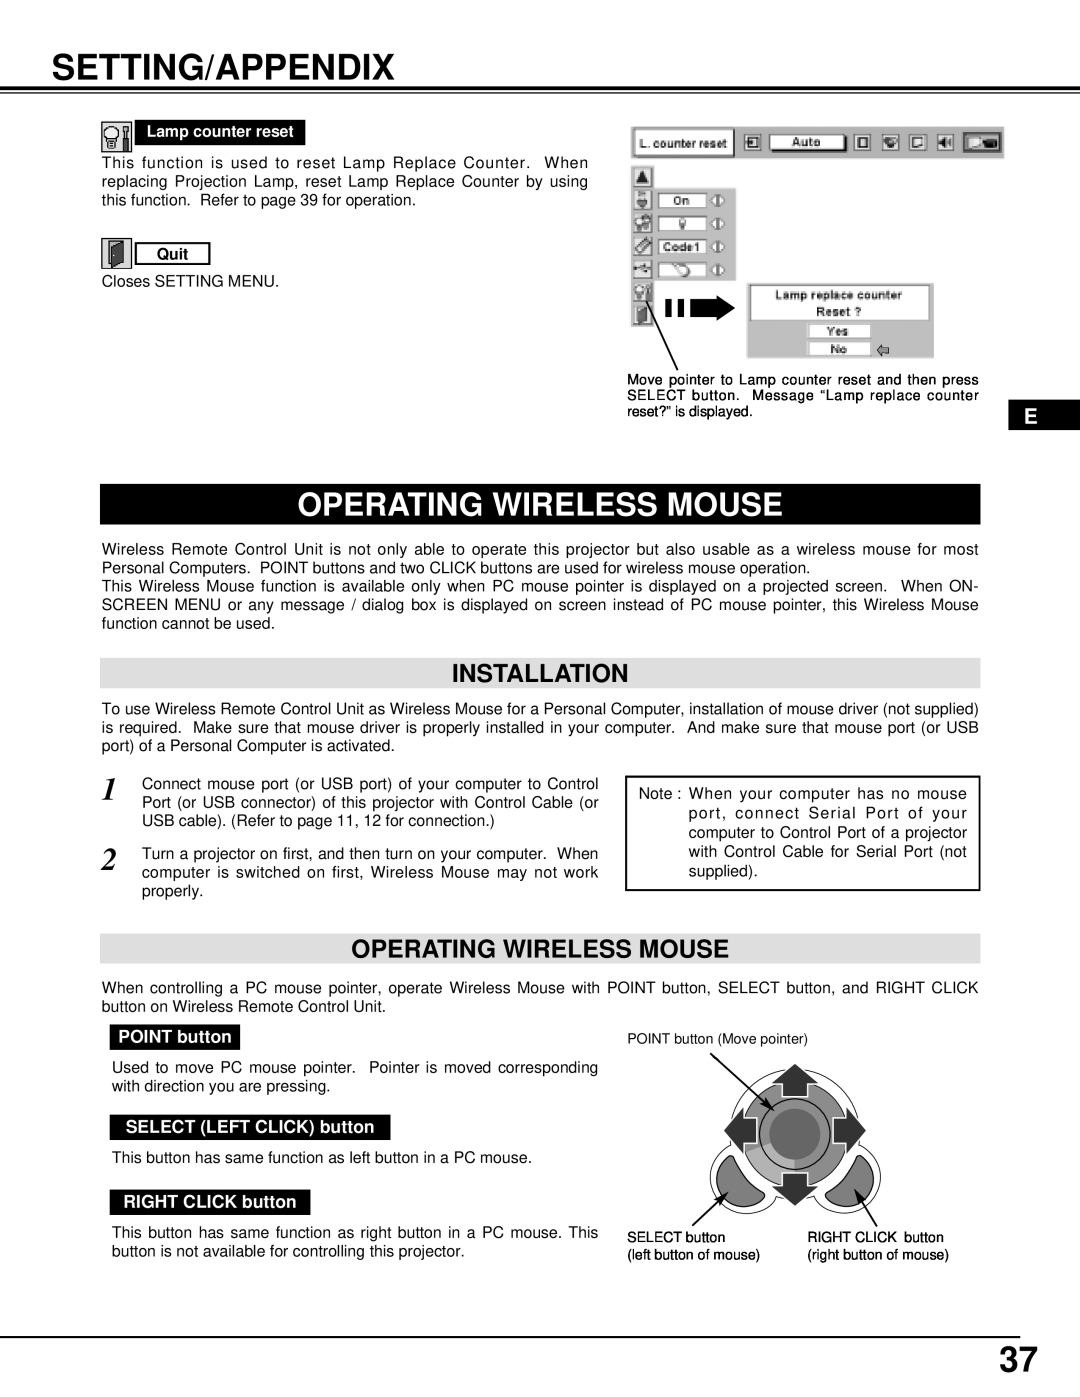 InFocus DP9295 manual Setting/Appendix, Operating Wireless Mouse, Installation, Quit 